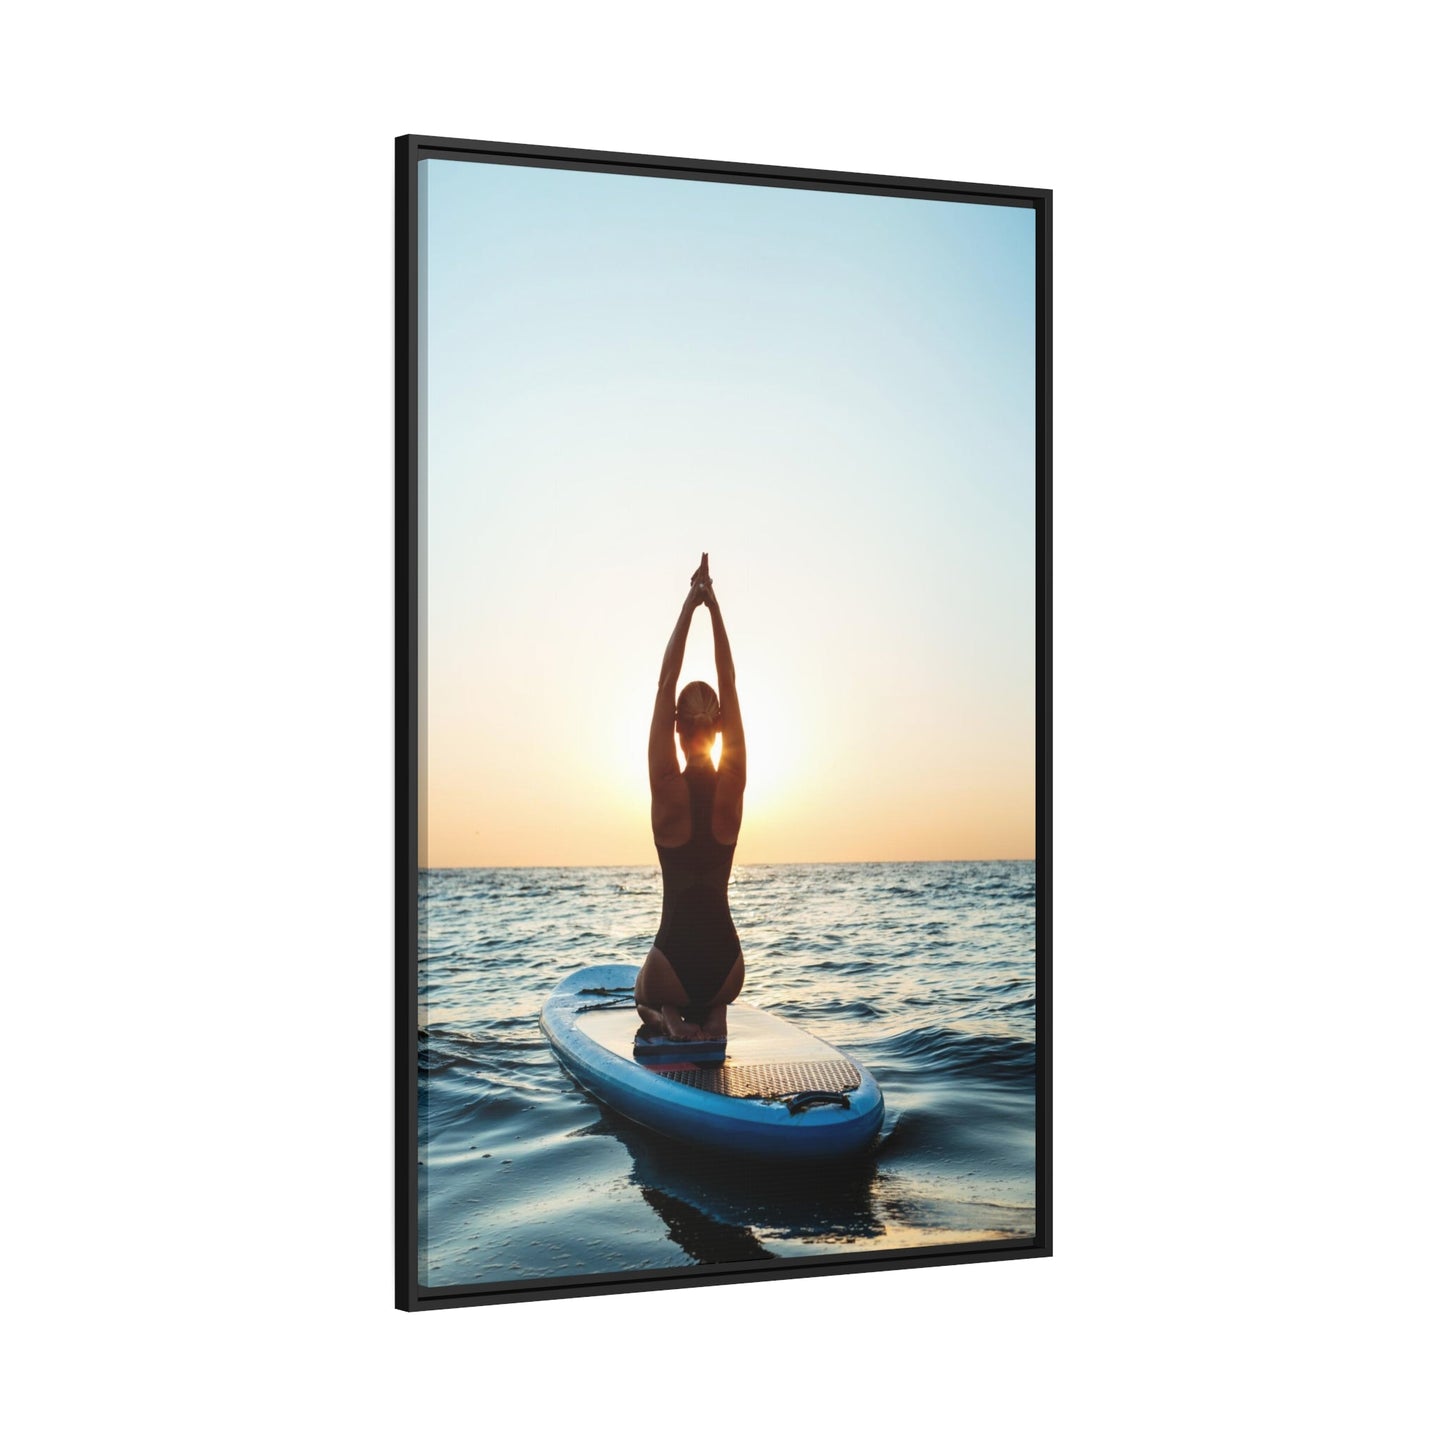 Find Your Peace: Wall Art of a Relaxing Sunset on Natural Canvas